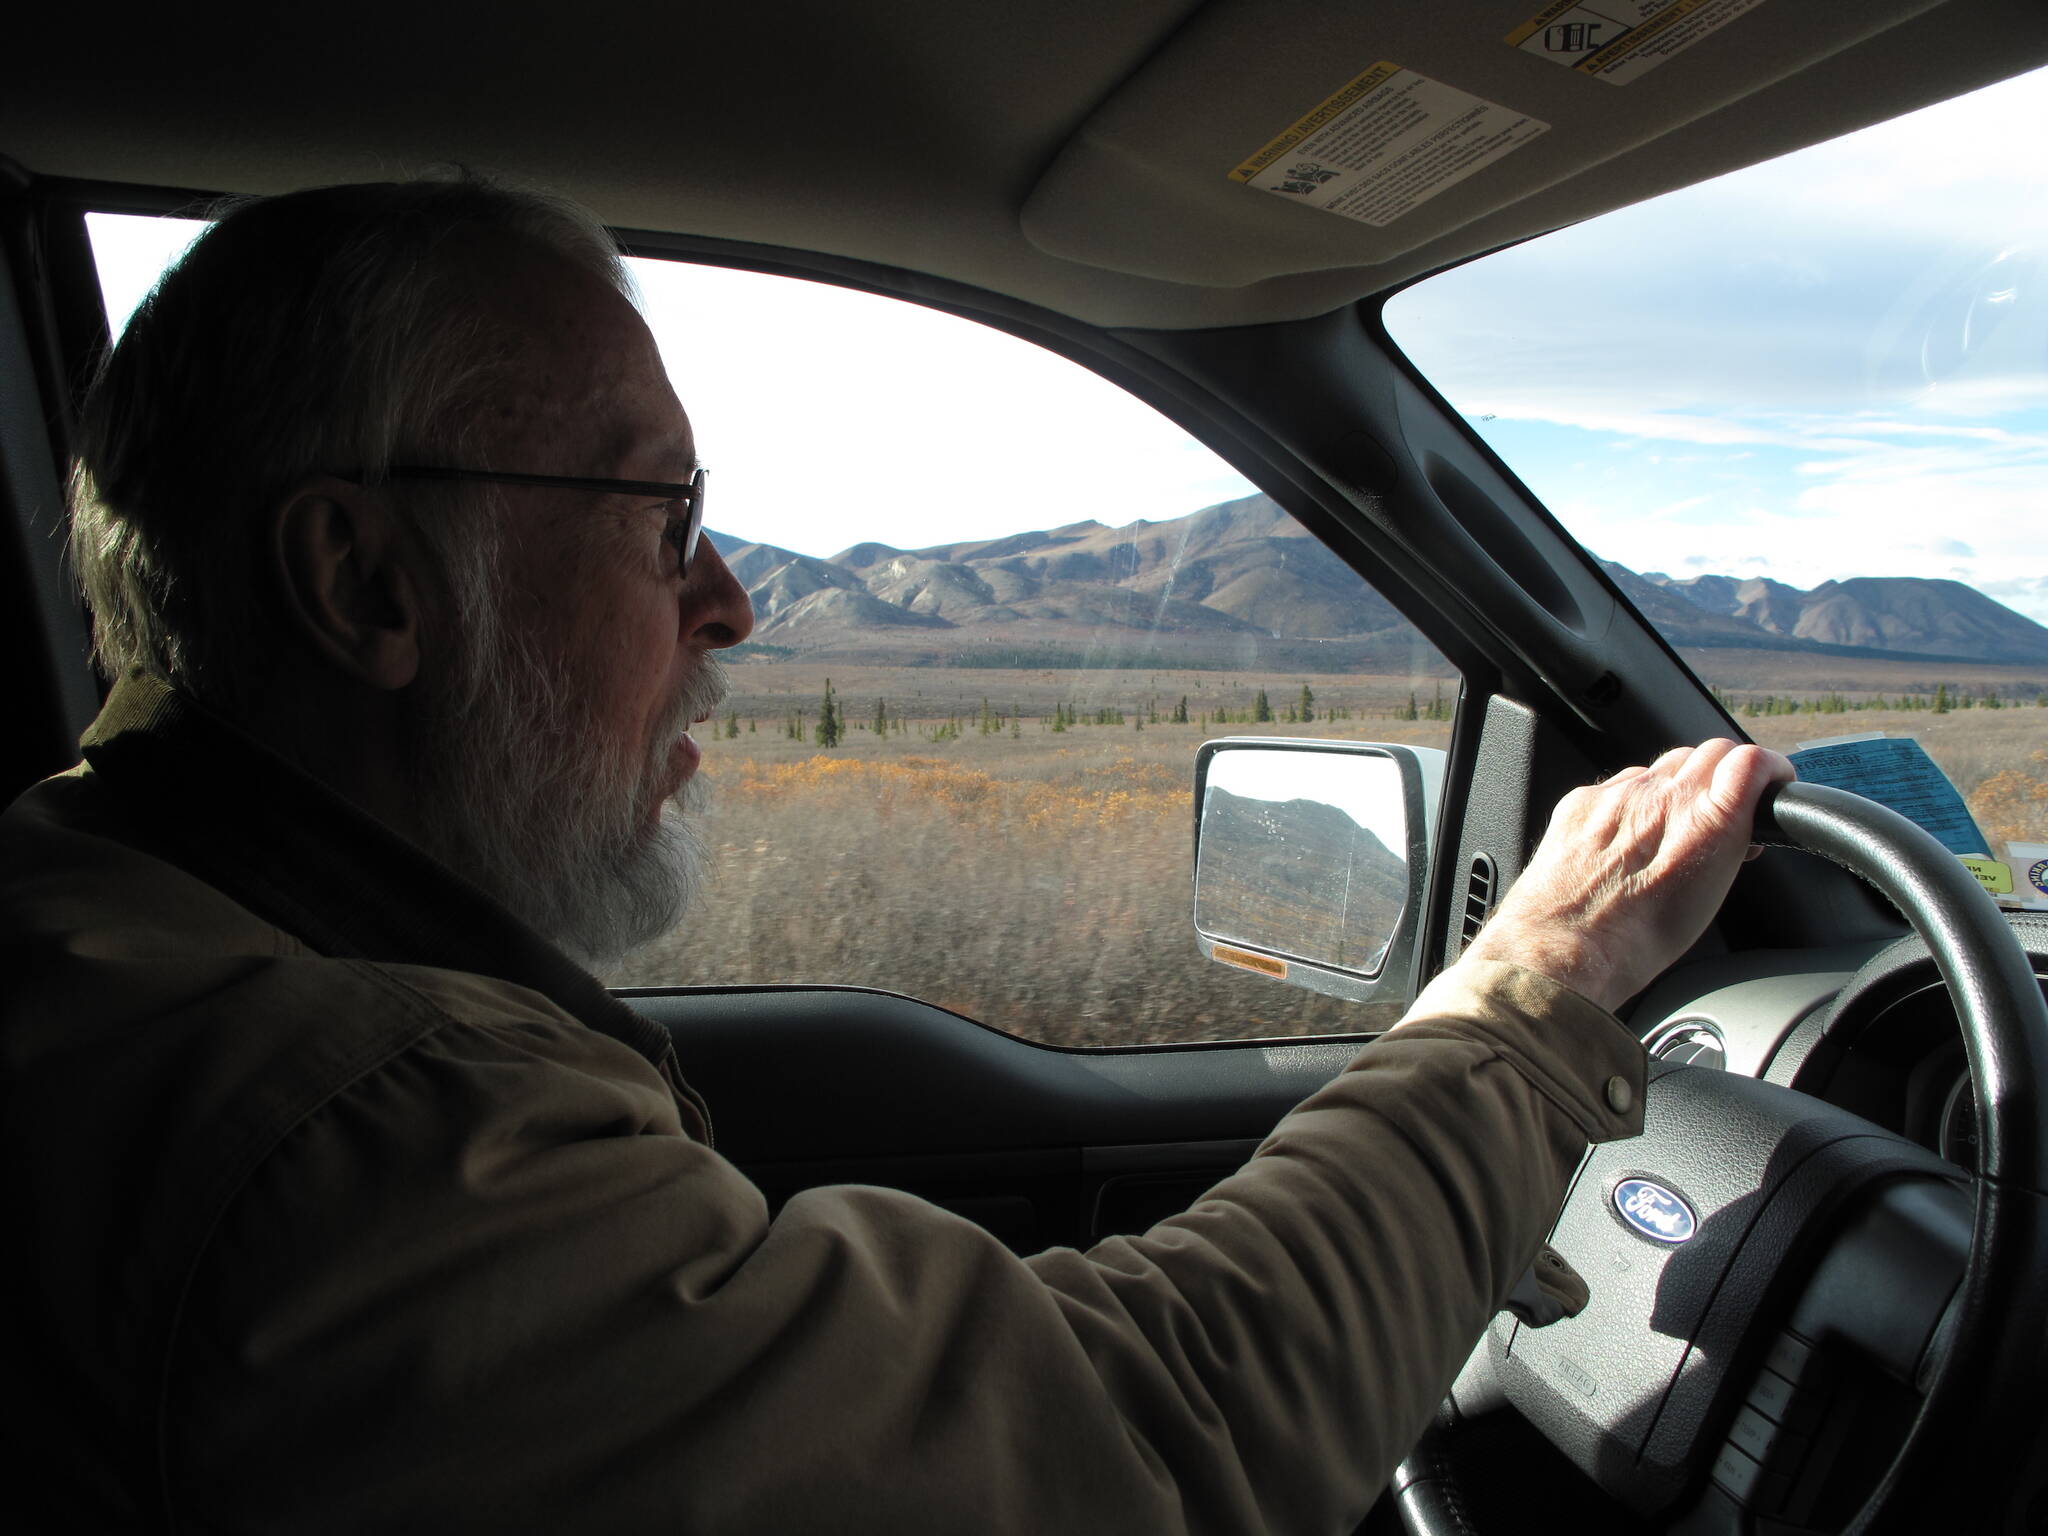 The late Vic Van Ballenberghe, who studied moose for decades, drives the Denali Park road in late September 2011. (Courtesy Photo / Ned Rozell)